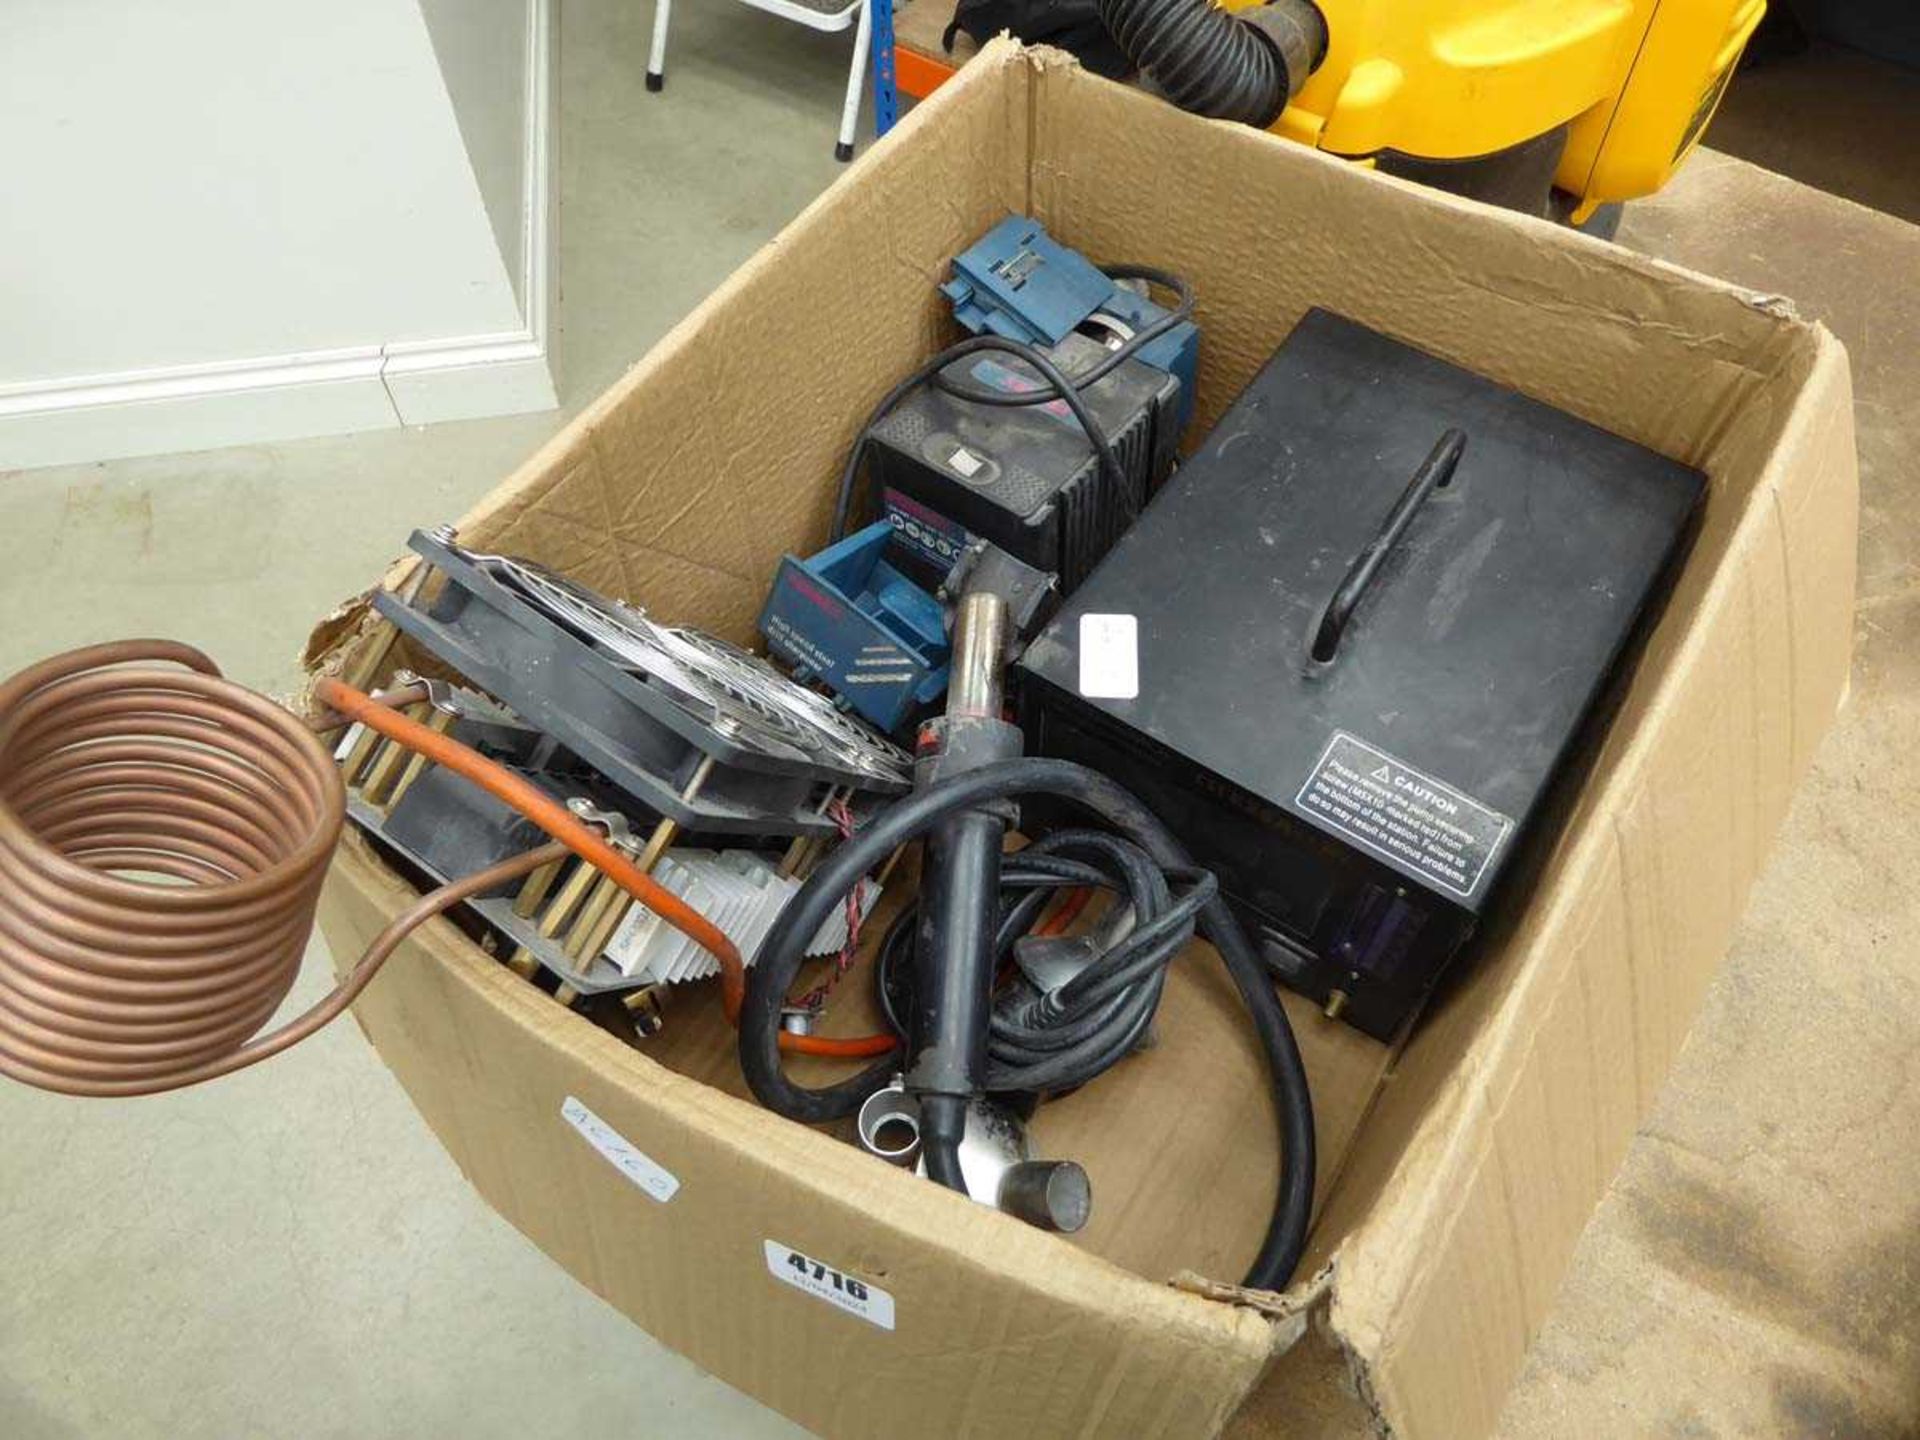 Box of Ferrex sharpener, fan motors and other items